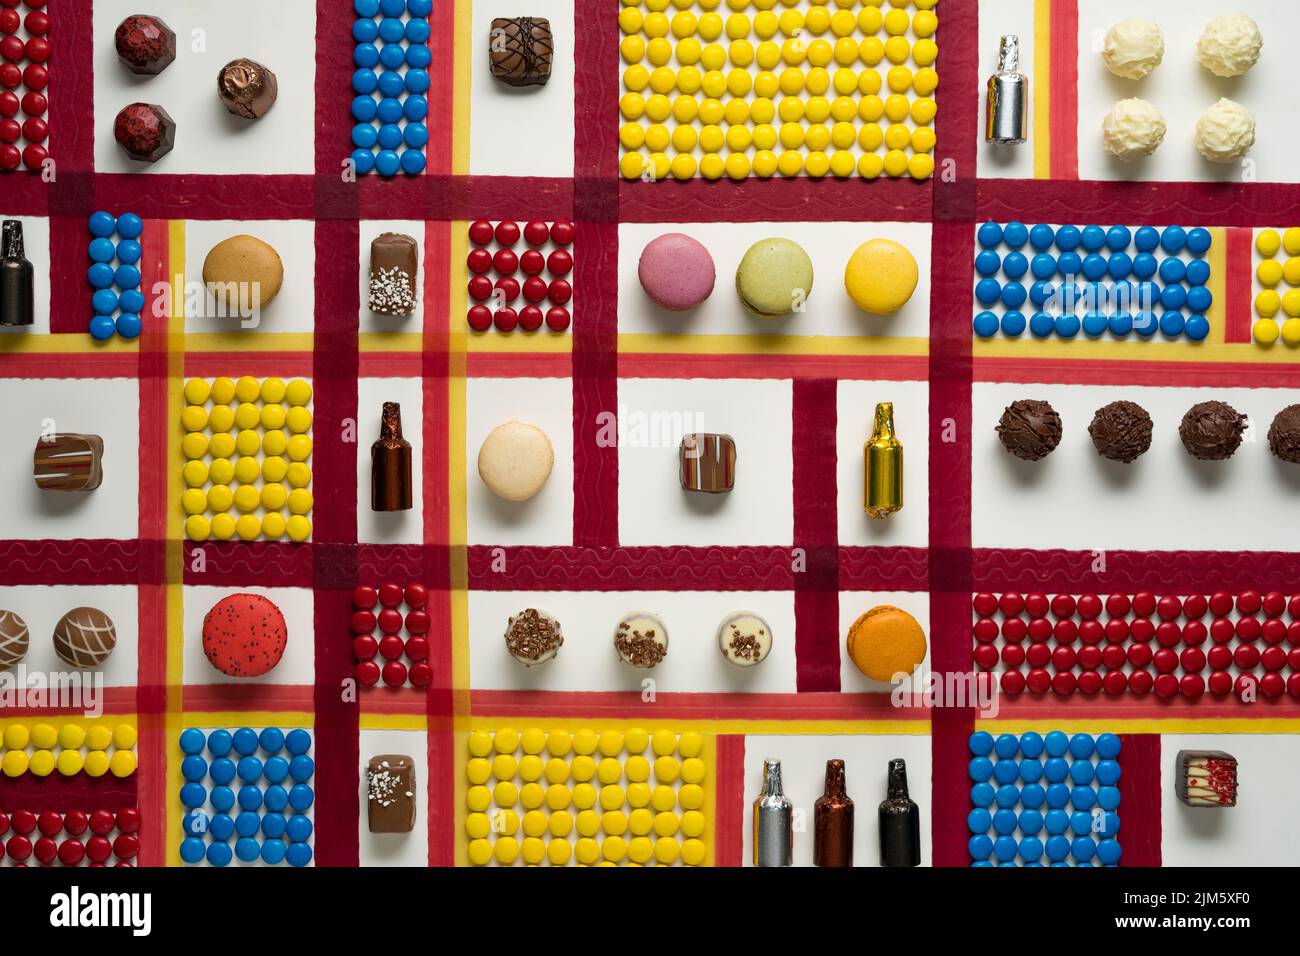 A top view of candy artwork in Mondrian style with red, blue, and yellow squares of button-shaped chocolates Stock Photo